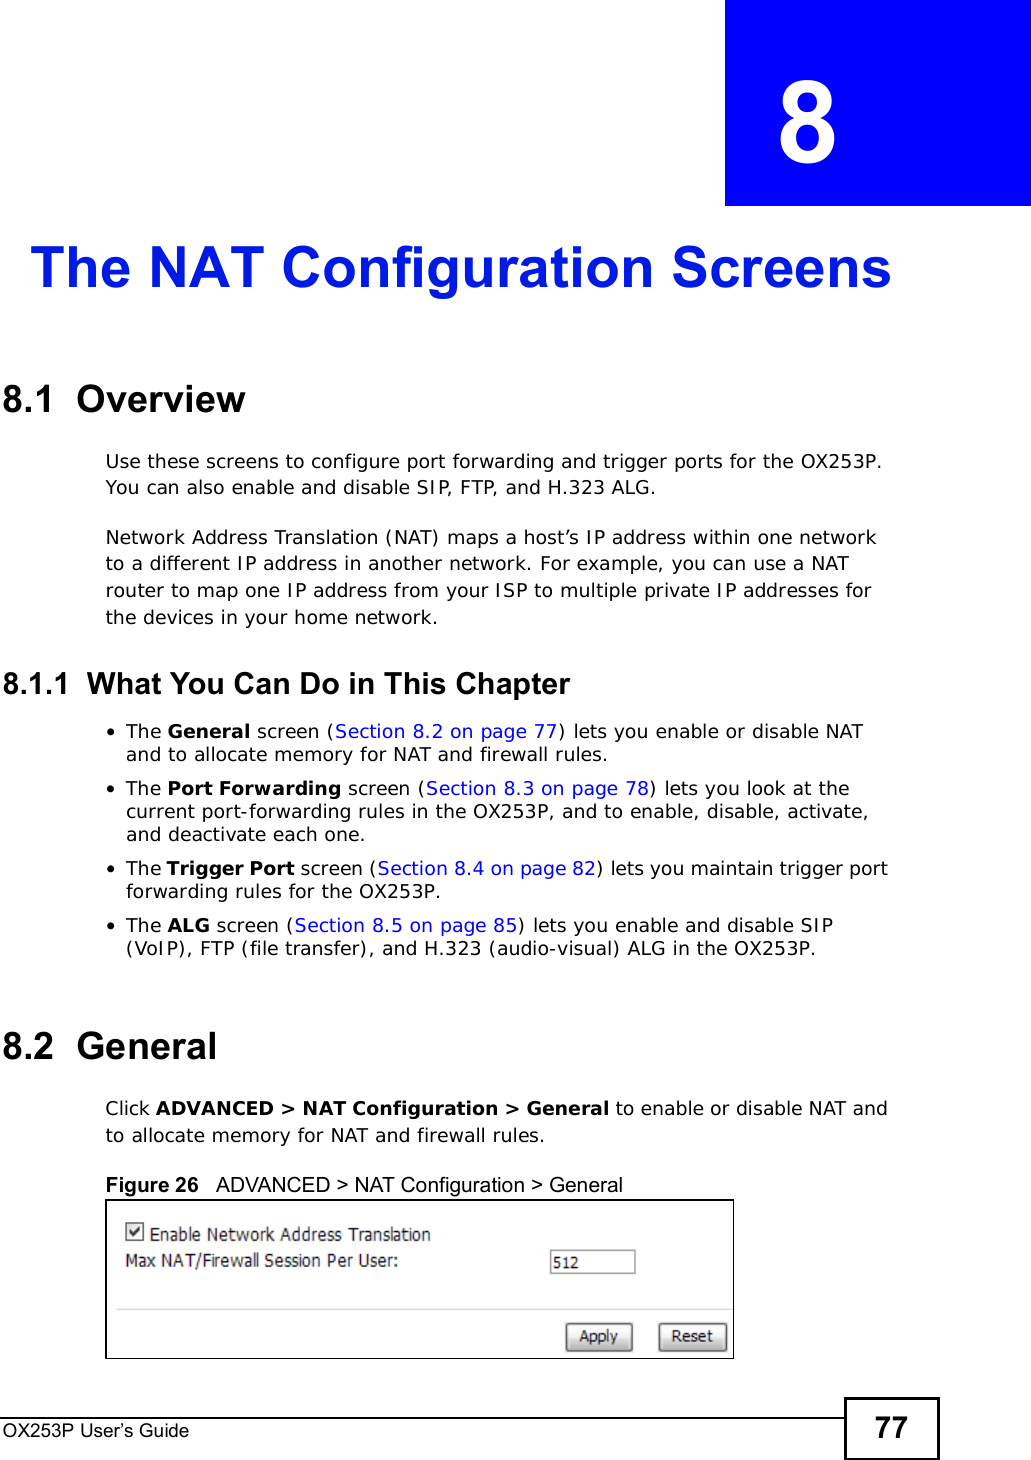 OX253P User’s Guide 77CHAPTER  8 The NAT Configuration Screens8.1  OverviewUse these screens to configure port forwarding and trigger ports for the OX253P. You can also enable and disable SIP, FTP, and H.323 ALG.Network Address Translation (NAT) maps a host’s IP address within one network to a different IP address in another network. For example, you can use a NAT router to map one IP address from your ISP to multiple private IP addresses for the devices in your home network.8.1.1  What You Can Do in This Chapter•The General screen (Section 8.2 on page 77) lets you enable or disable NAT and to allocate memory for NAT and firewall rules.•The Port Forwarding screen (Section 8.3 on page 78) lets you look at the current port-forwarding rules in the OX253P, and to enable, disable, activate, and deactivate each one.•The Trigger Port screen (Section 8.4 on page 82) lets you maintain trigger port forwarding rules for the OX253P.•The ALG screen (Section 8.5 on page 85) lets you enable and disable SIP (VoIP), FTP (file transfer), and H.323 (audio-visual) ALG in the OX253P.8.2  GeneralClick ADVANCED &gt; NAT Configuration &gt; General to enable or disable NAT and to allocate memory for NAT and firewall rules.Figure 26   ADVANCED &gt; NAT Configuration &gt; General